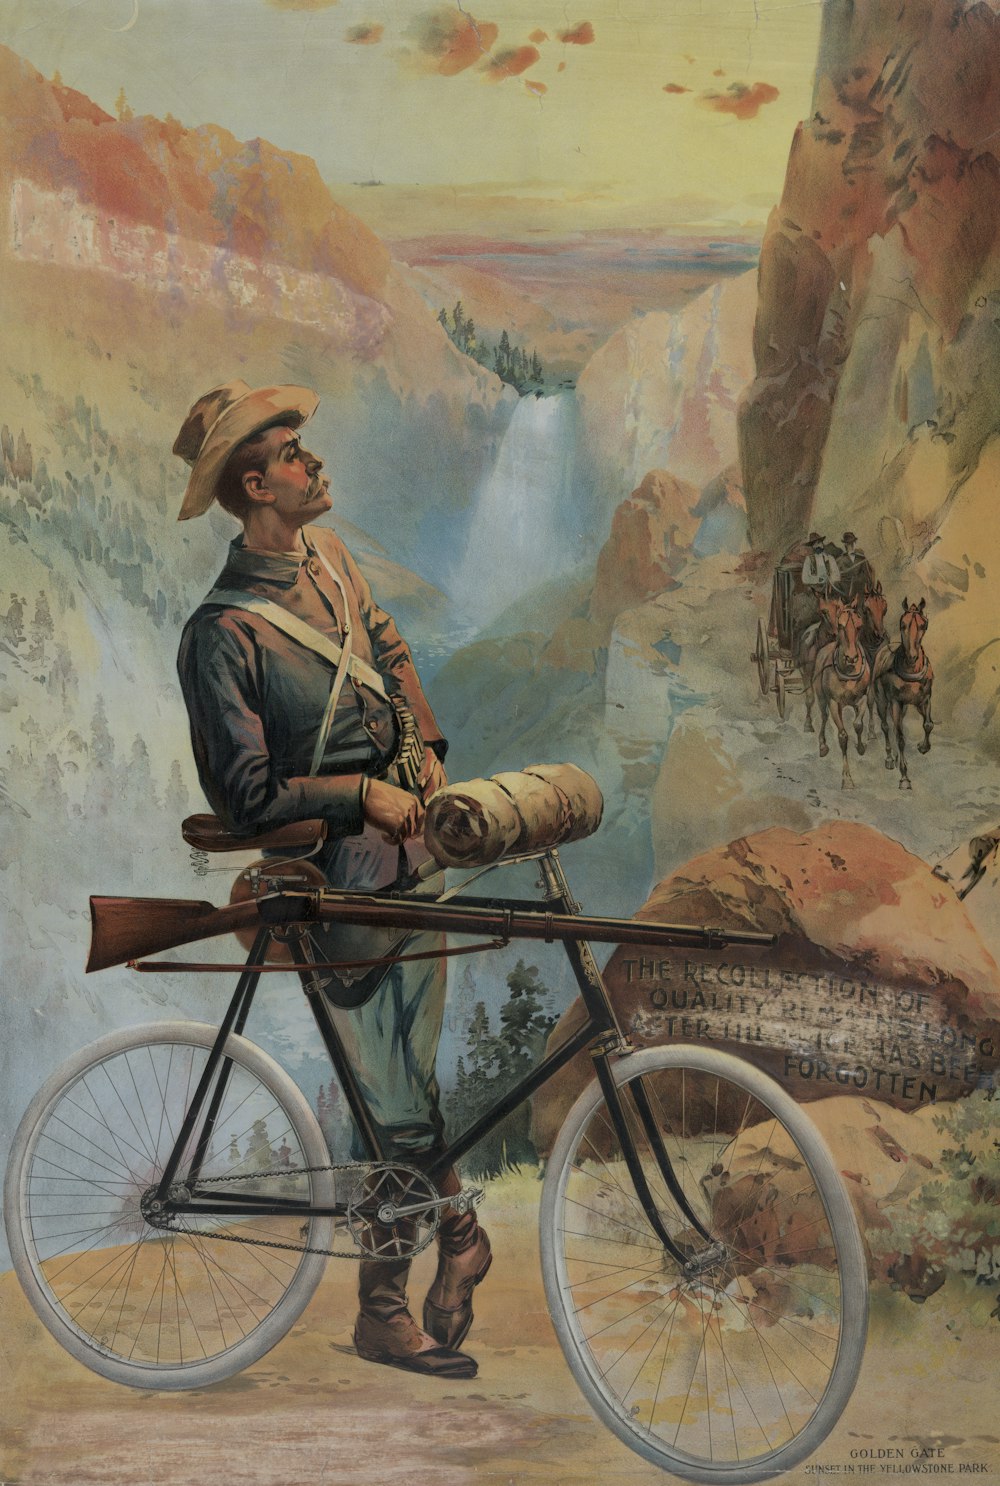 Man, with a bicycle to which a rifle is fastened, standing on a mountain path